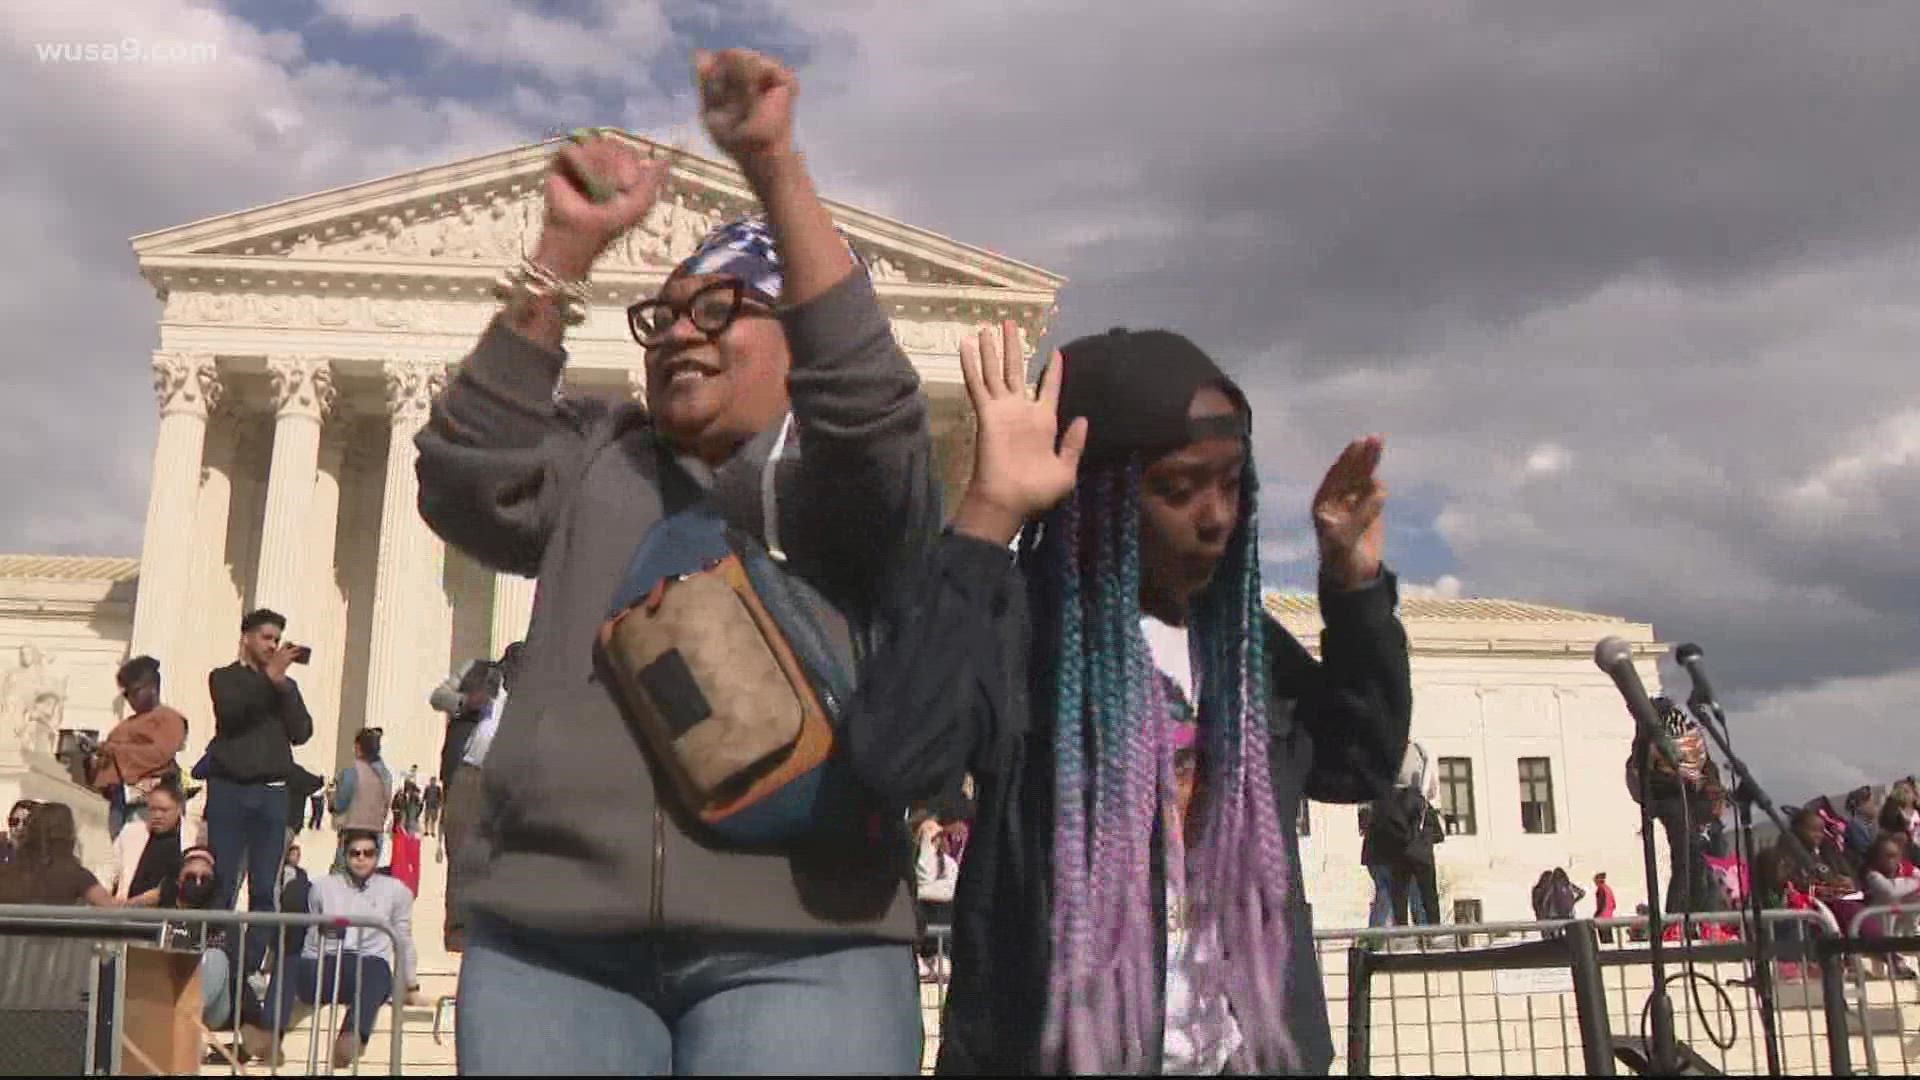 Hundreds of people gathered on the steps of the U.S. Supreme Court Friday to celebrate the first Black woman confirmed to serve on the nation’s highest court.